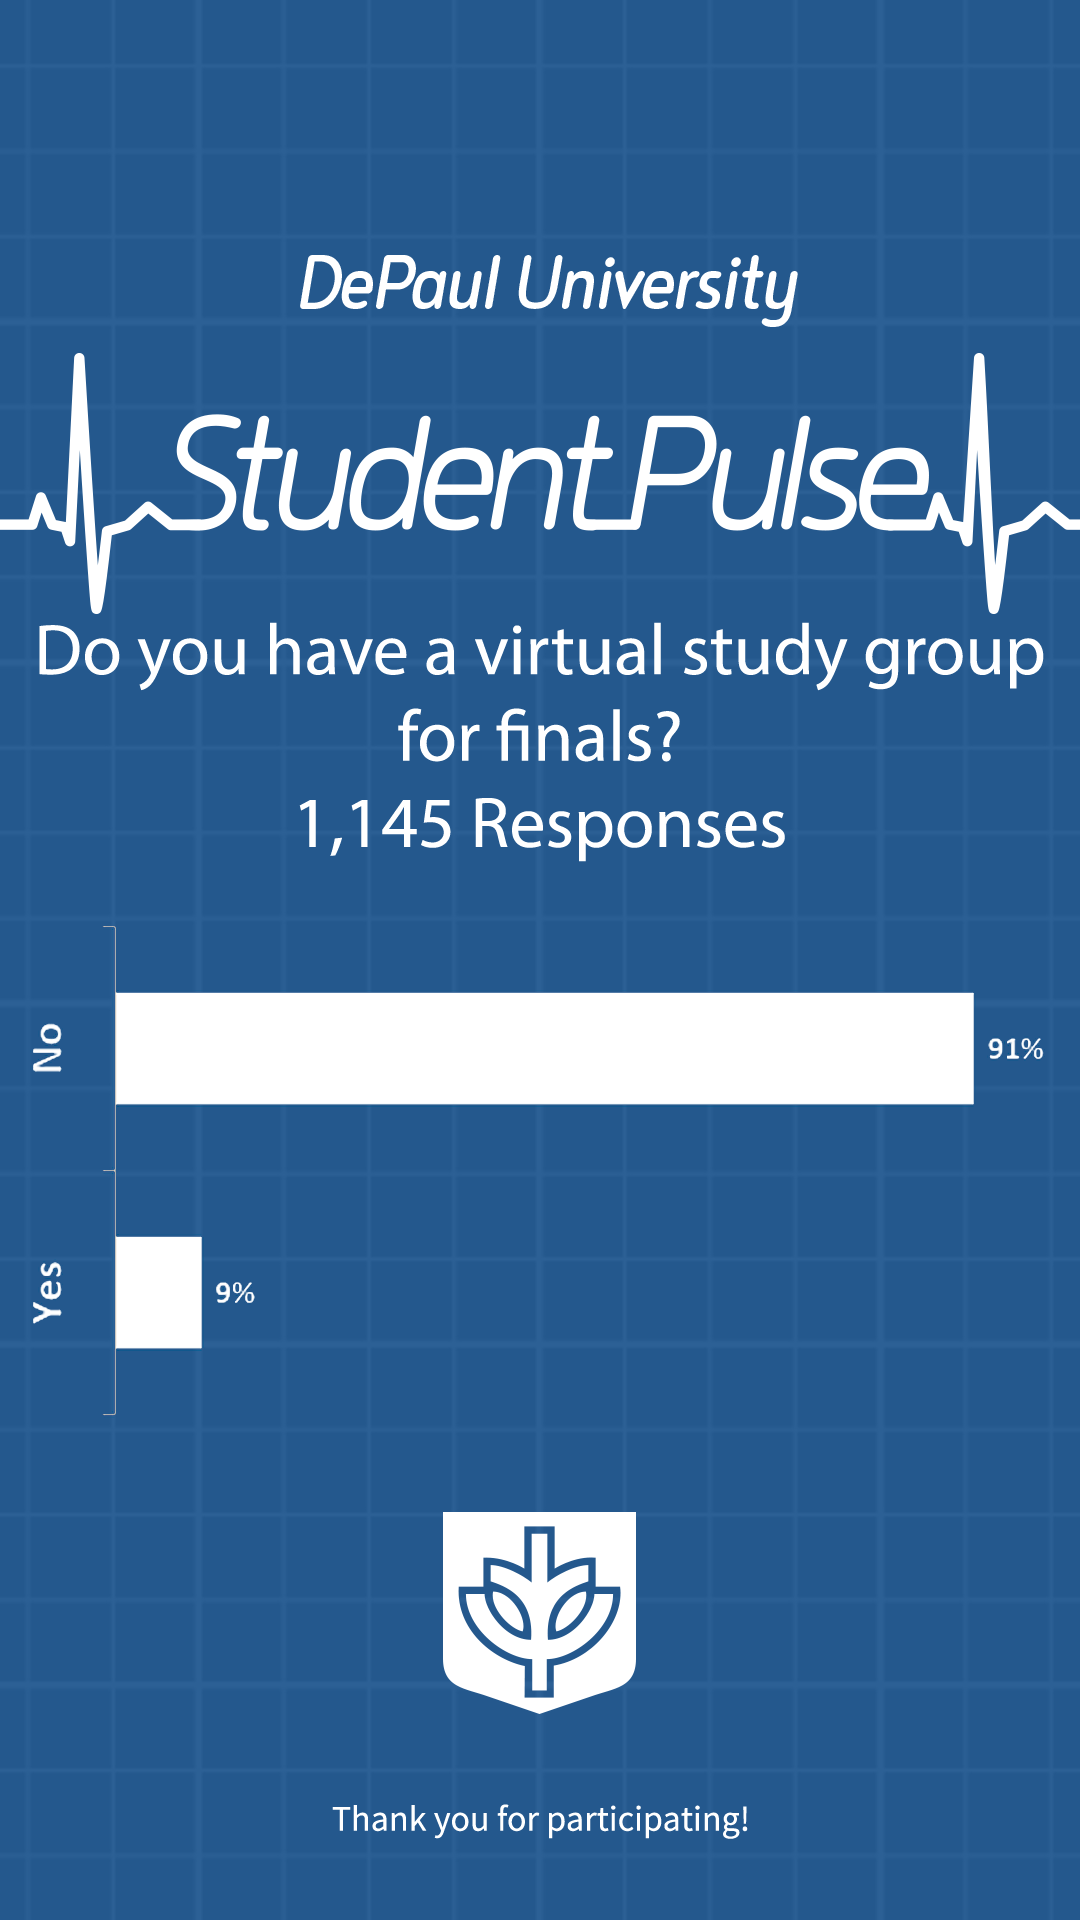 Do you have a virtual study group for finals?